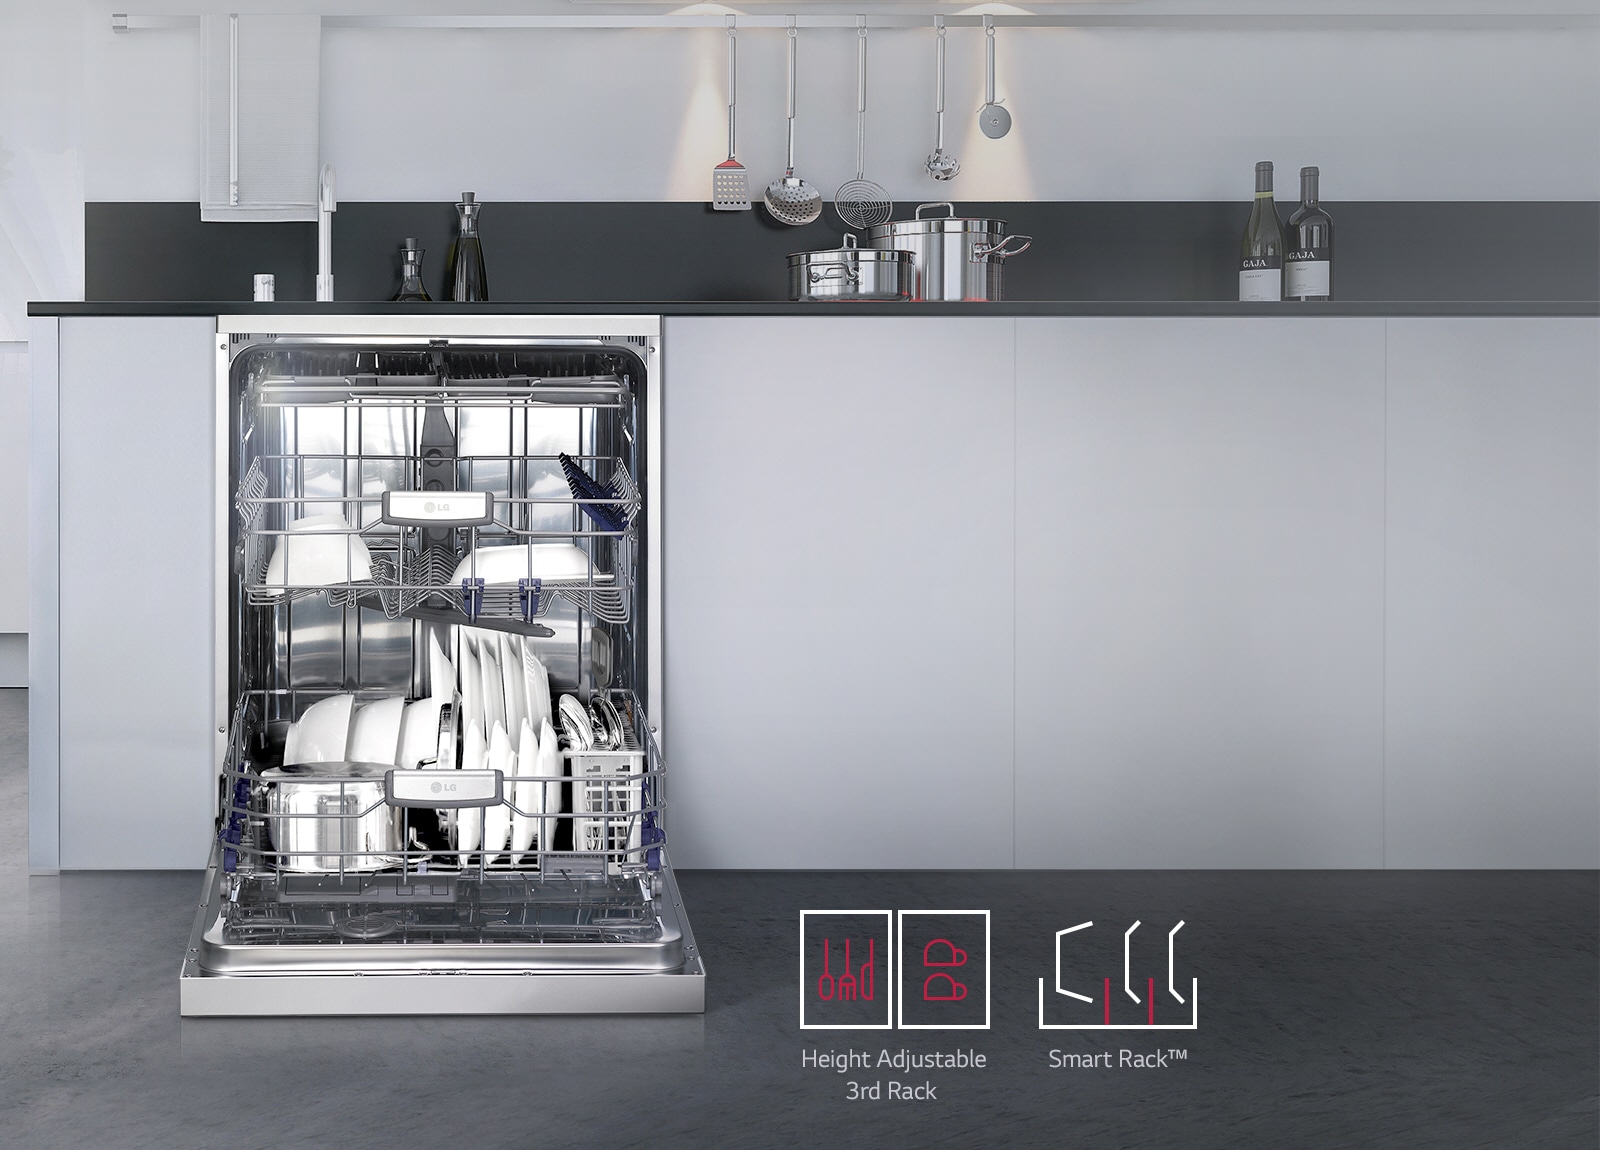 Smart Rack™ Efficiently Load More Dishes